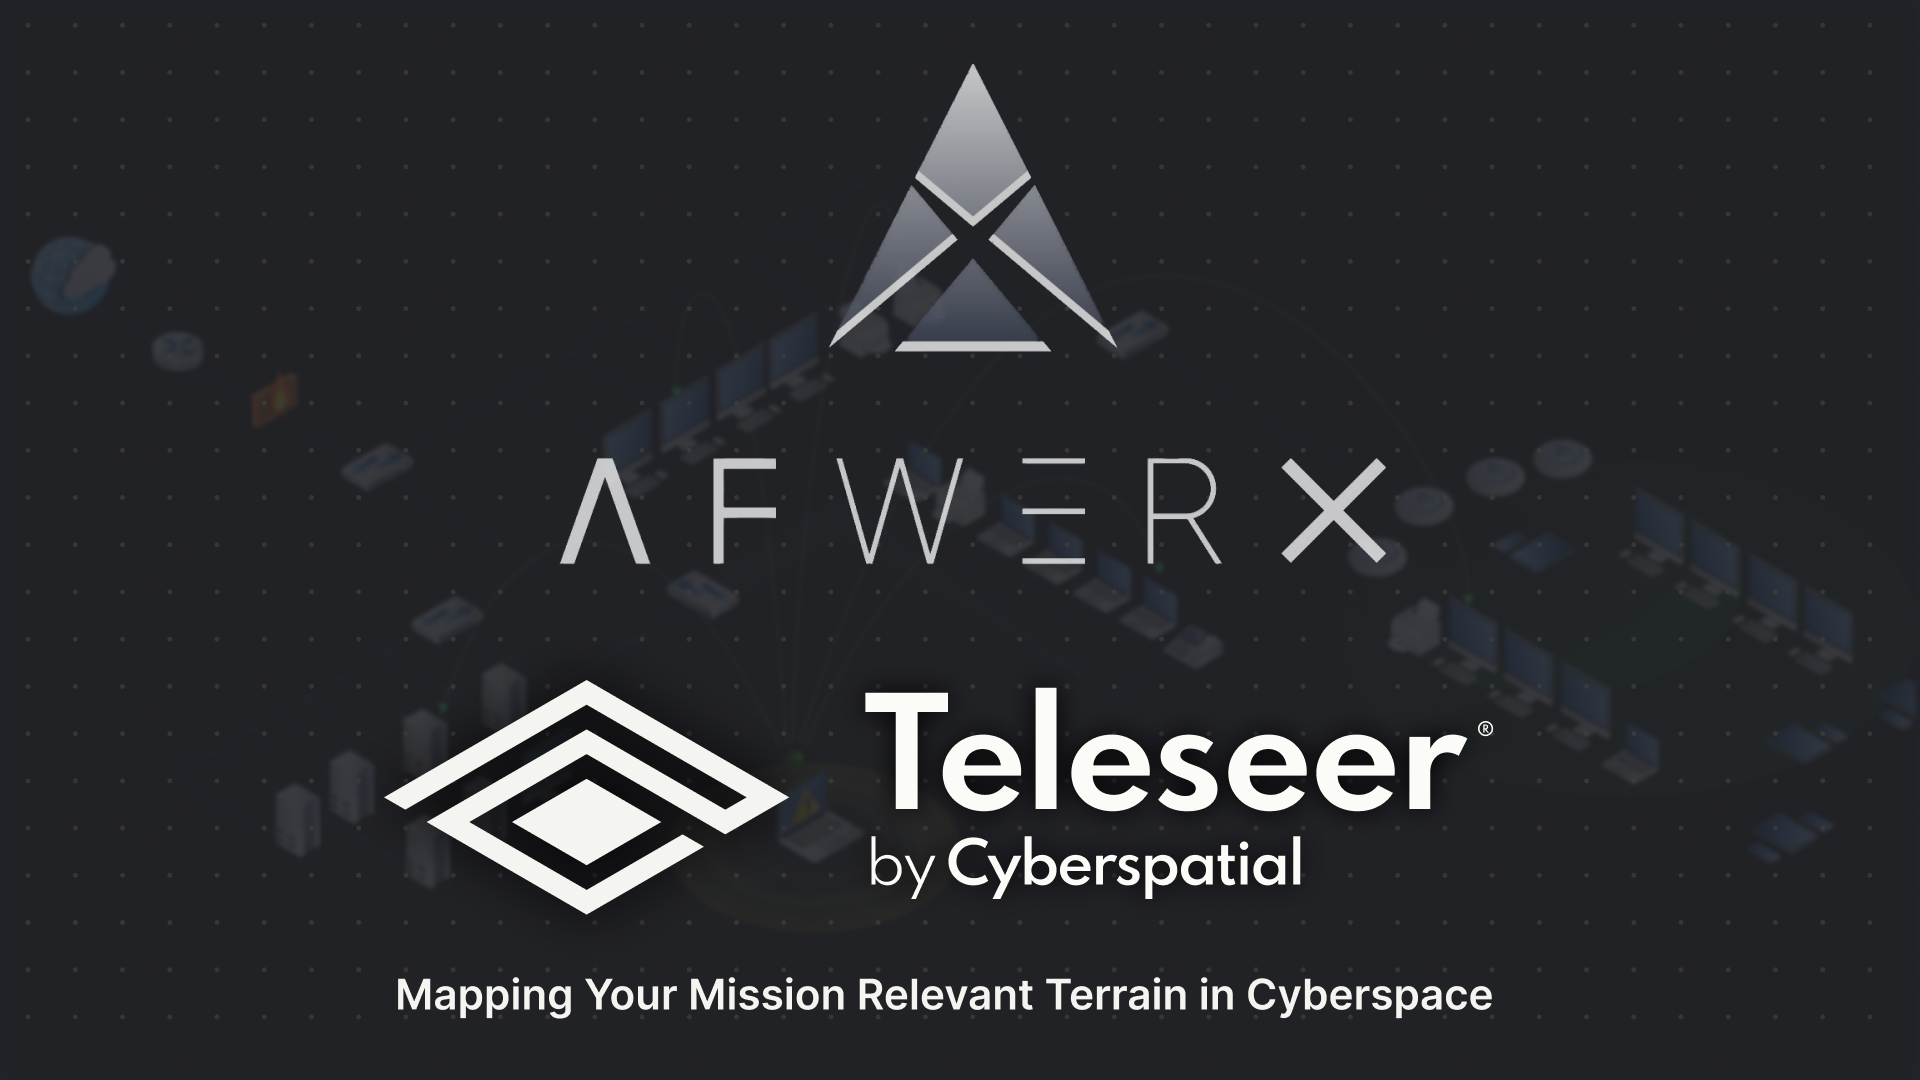 AFWERX and Cyberspatial